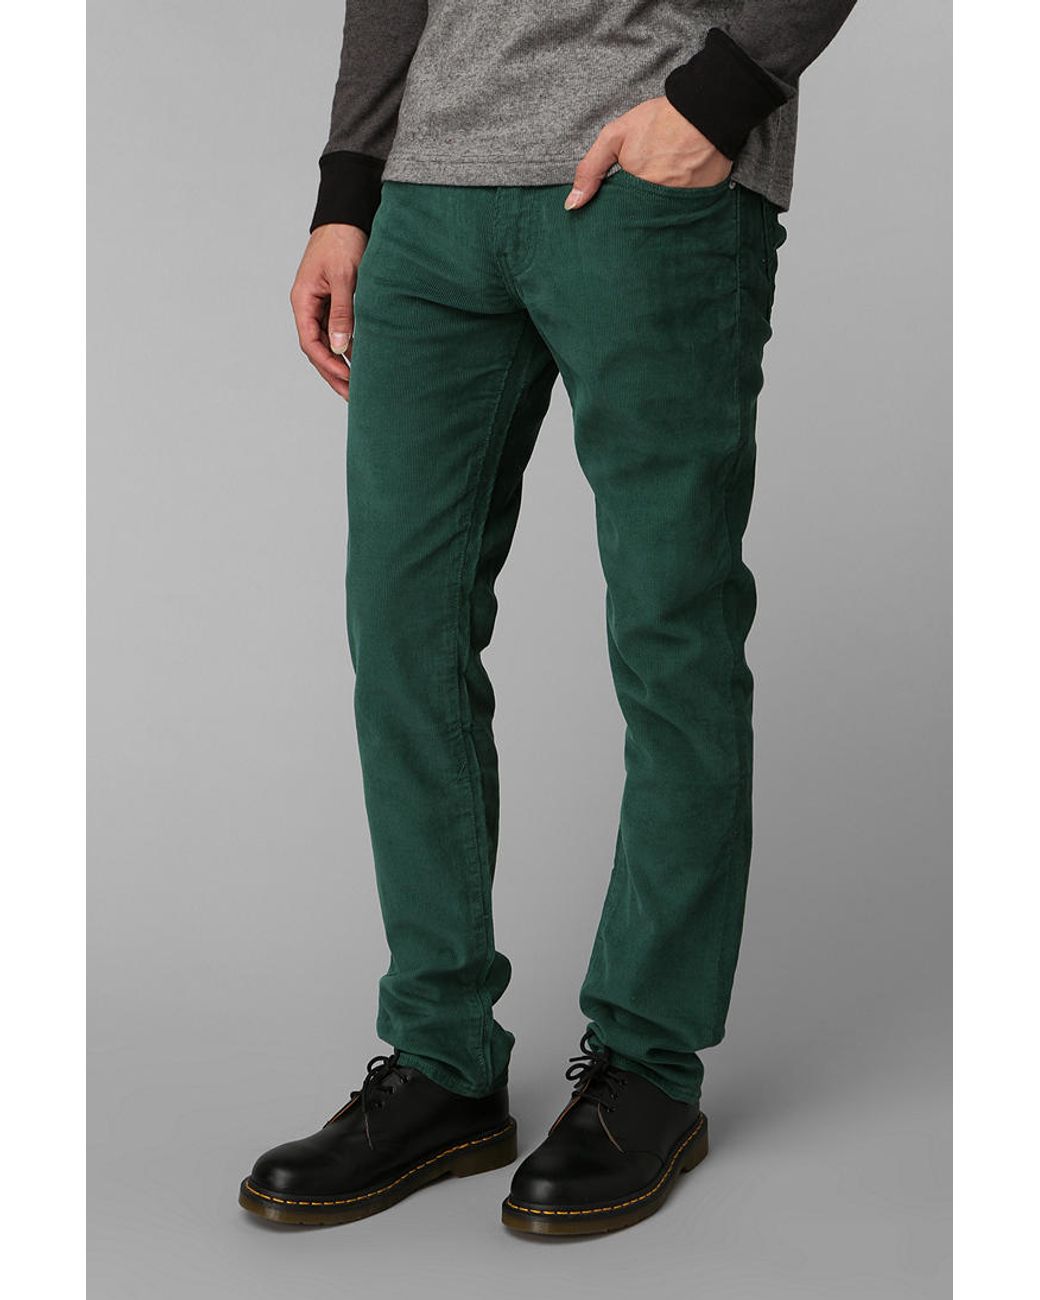 Urban Outfitters Levis 511 Corduroy Pant in Green for Men